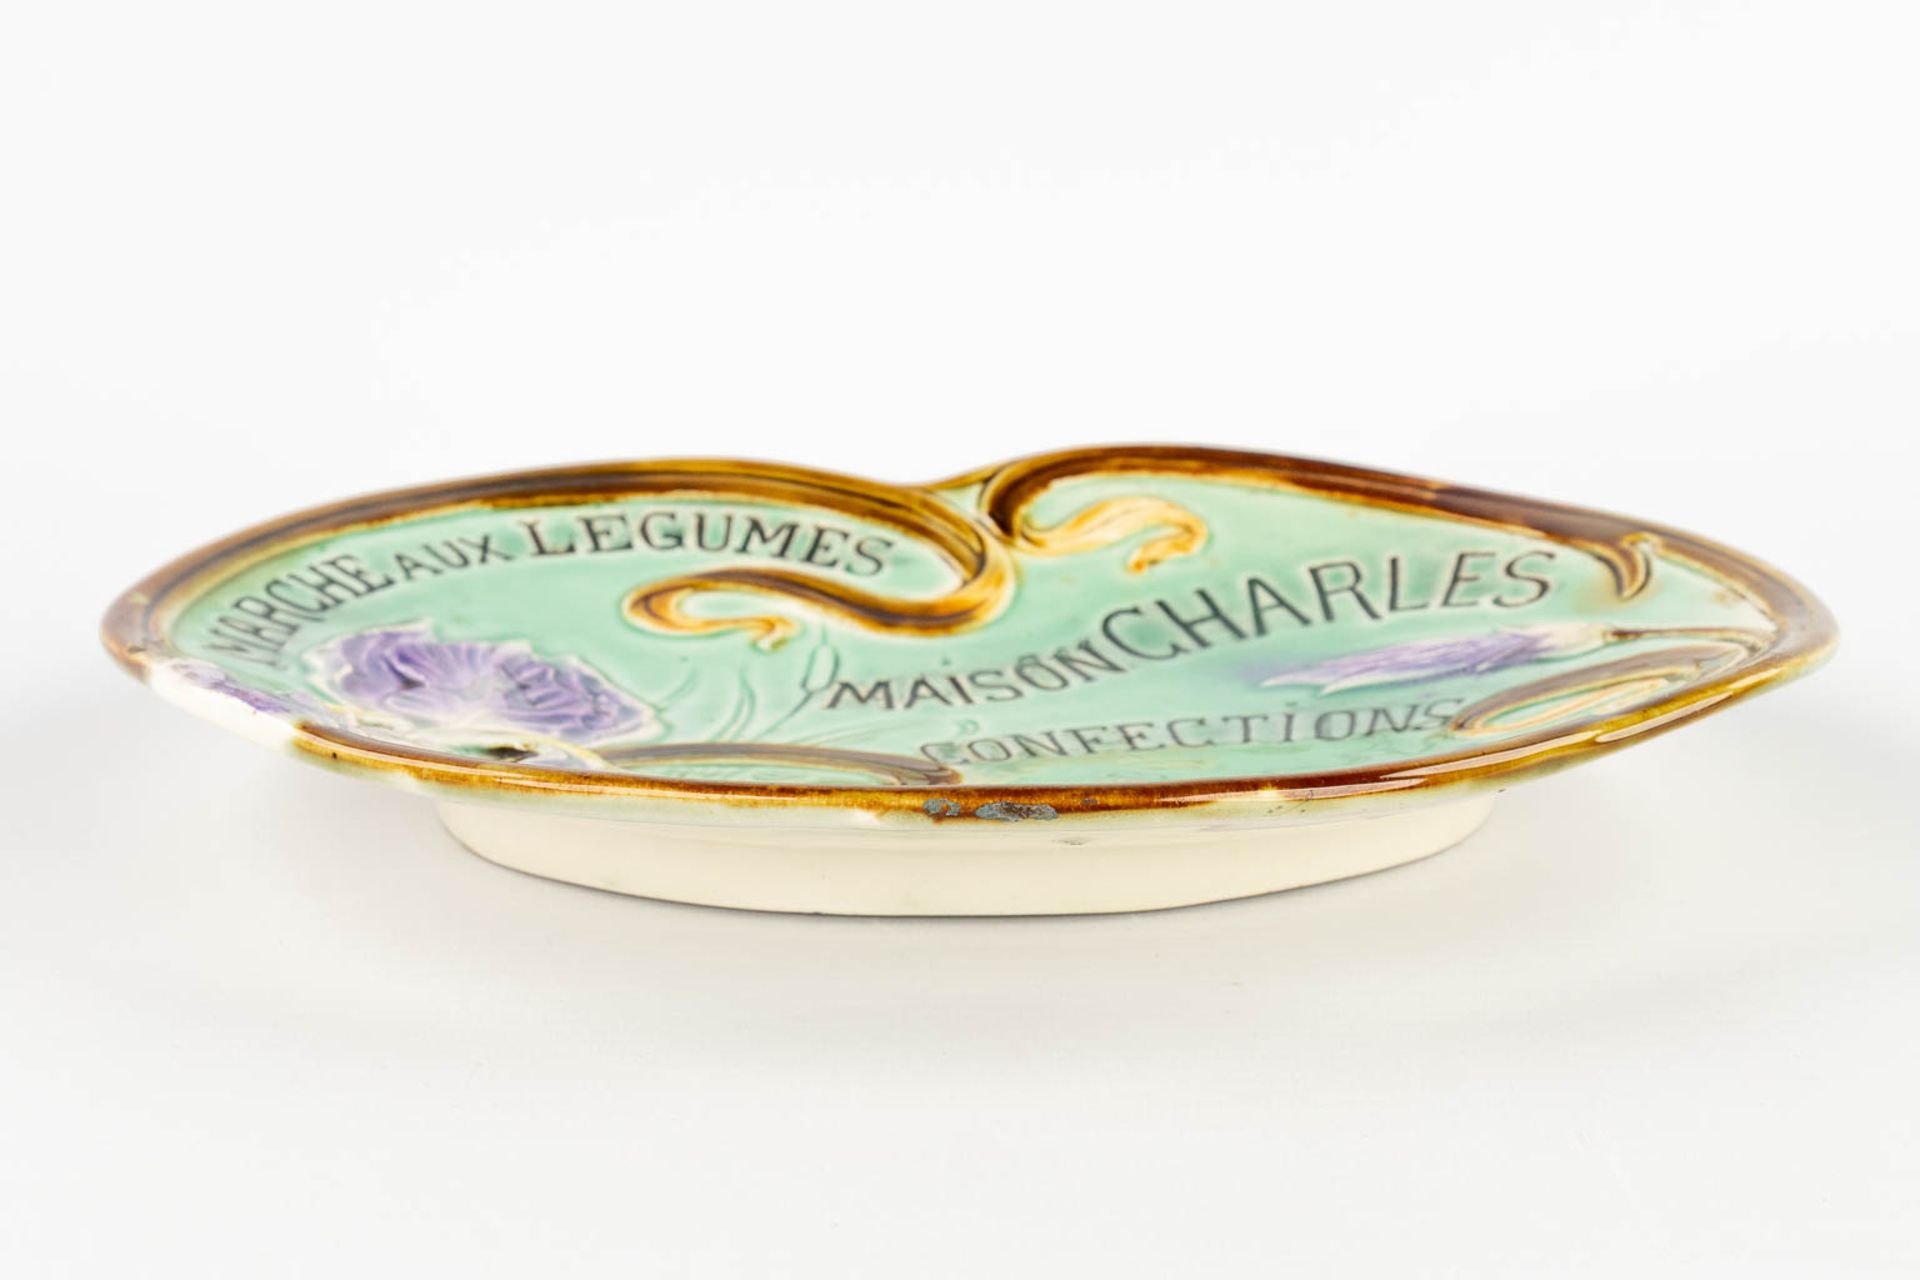 Hasselts Faience, a bowl ?Maison Charles? Confections Gand, Belgium, 19th C. (D:20 x W:26 x H:3,5 cm - Image 4 of 7